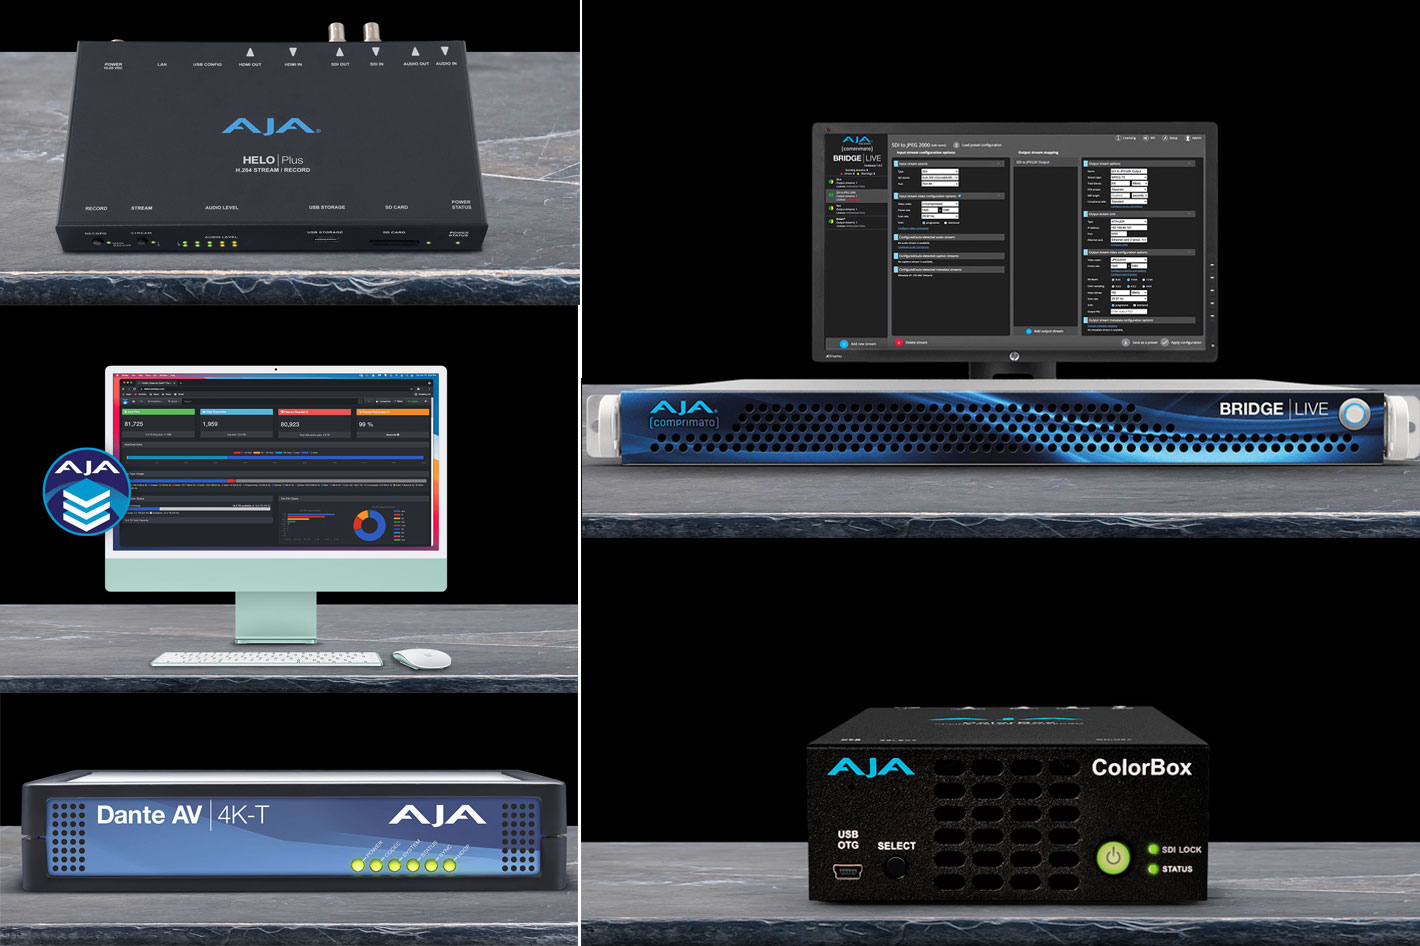 AJA at NAB: groundbreaking solutions for M&E and proAV industries